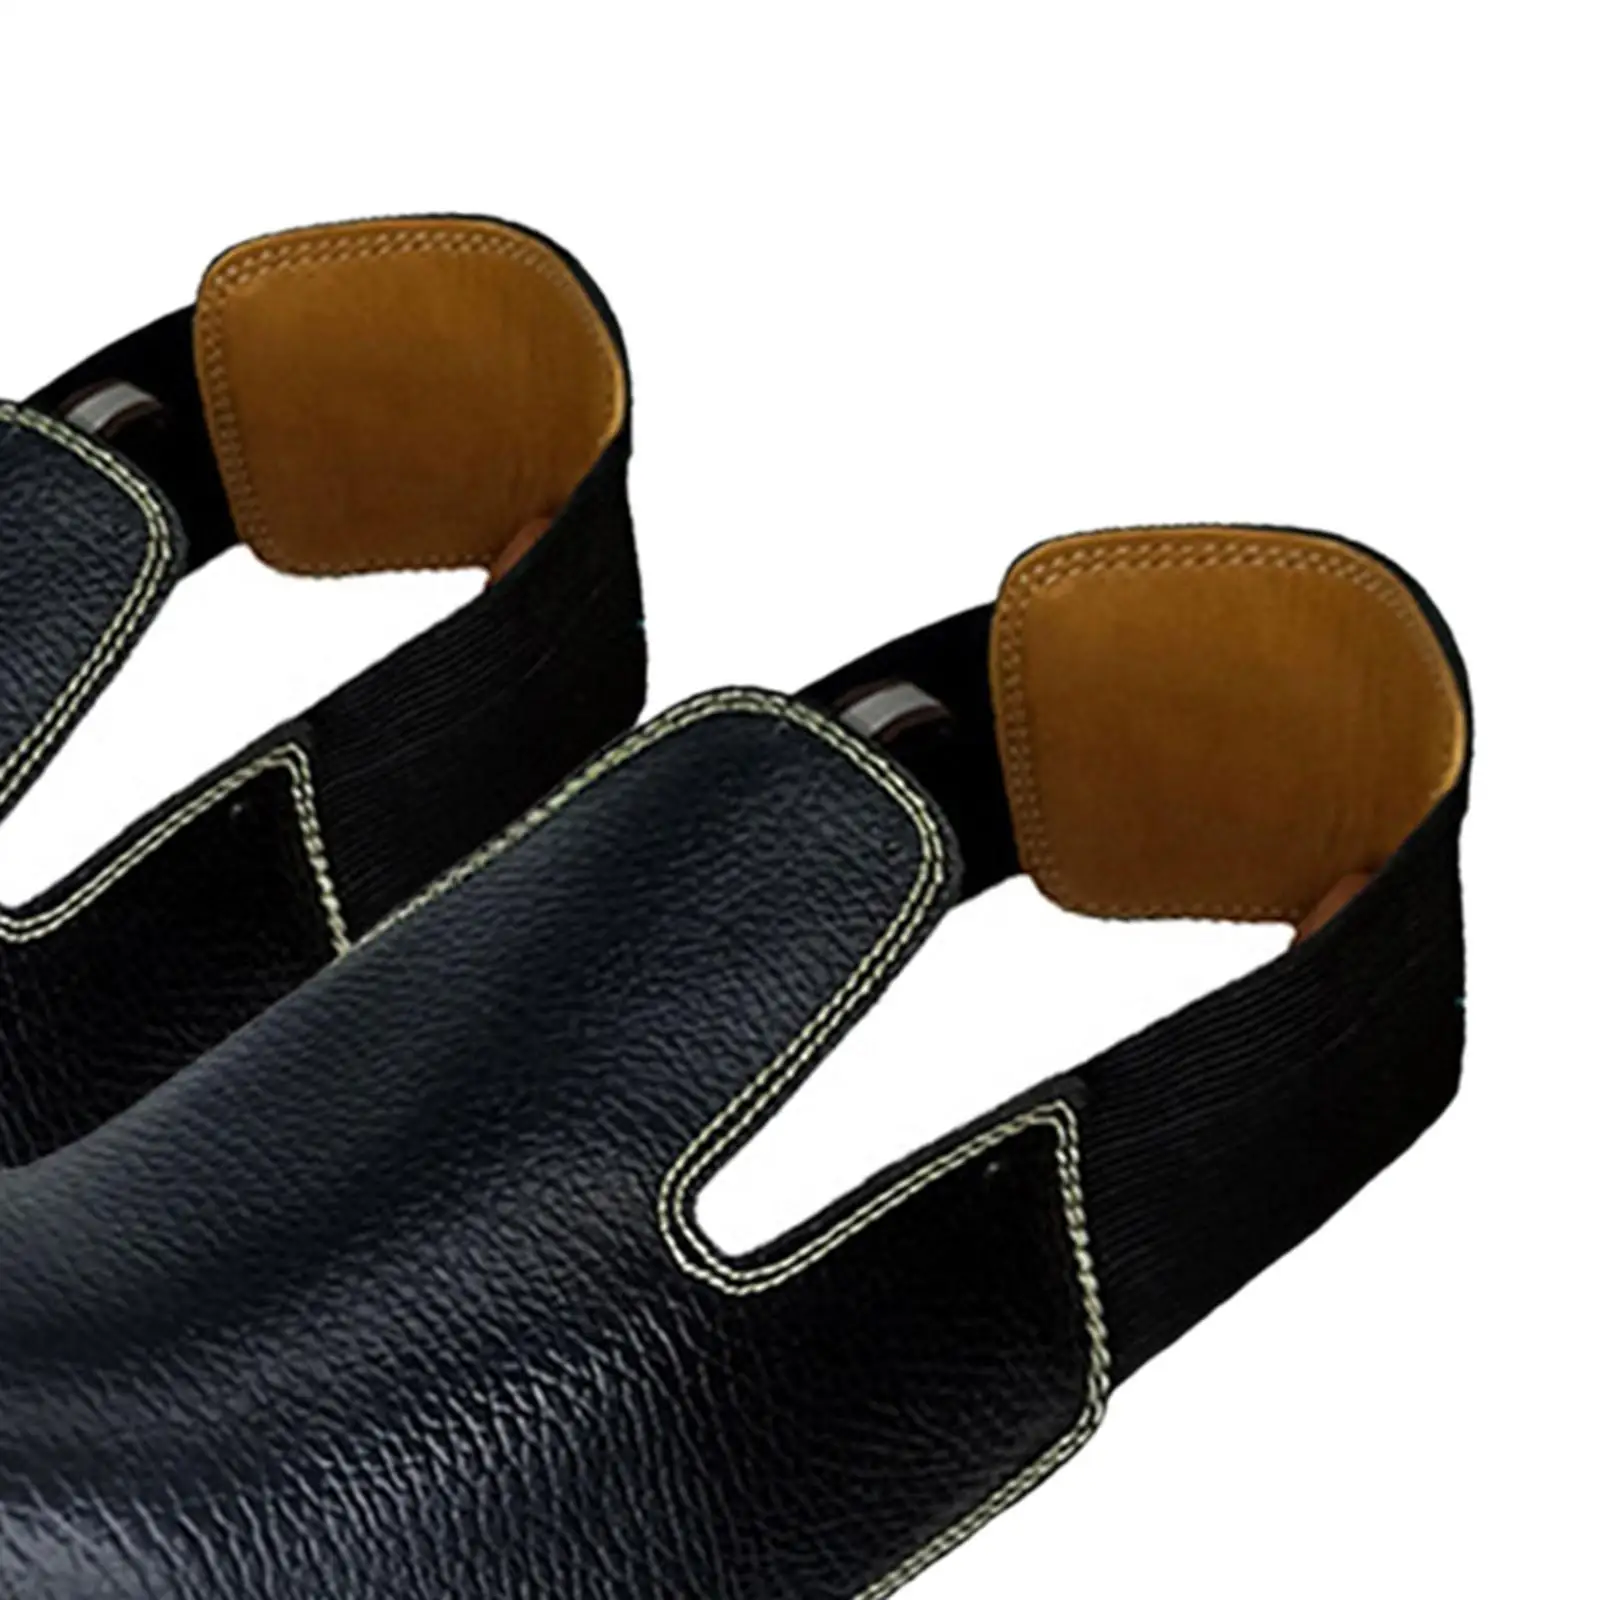 Toe Caps Safe Shoe Covers Leather Overshoes Cover Guards Anti Kick with Elastic Strap Toe Protector for Grinding Welding